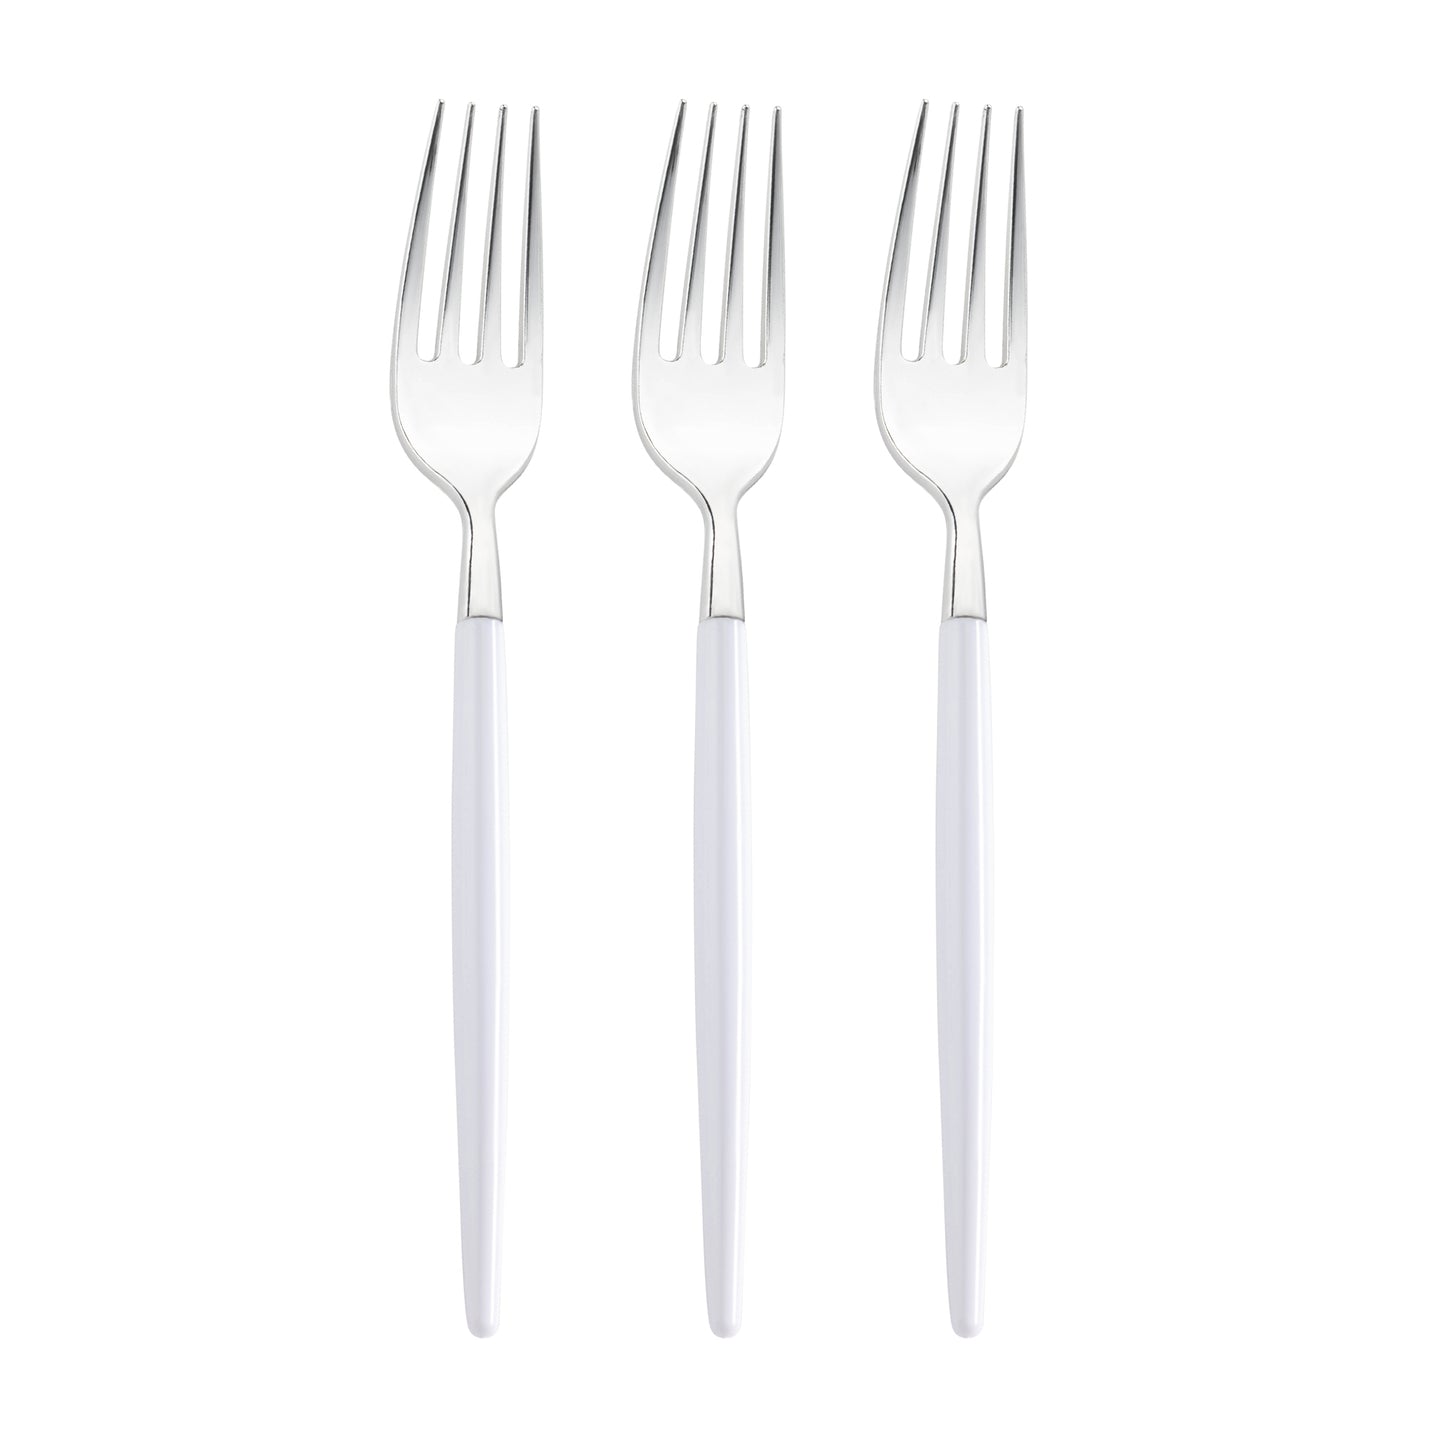 Shiny Silver with White Handle Moderno Disposable Plastic Dinner Forks